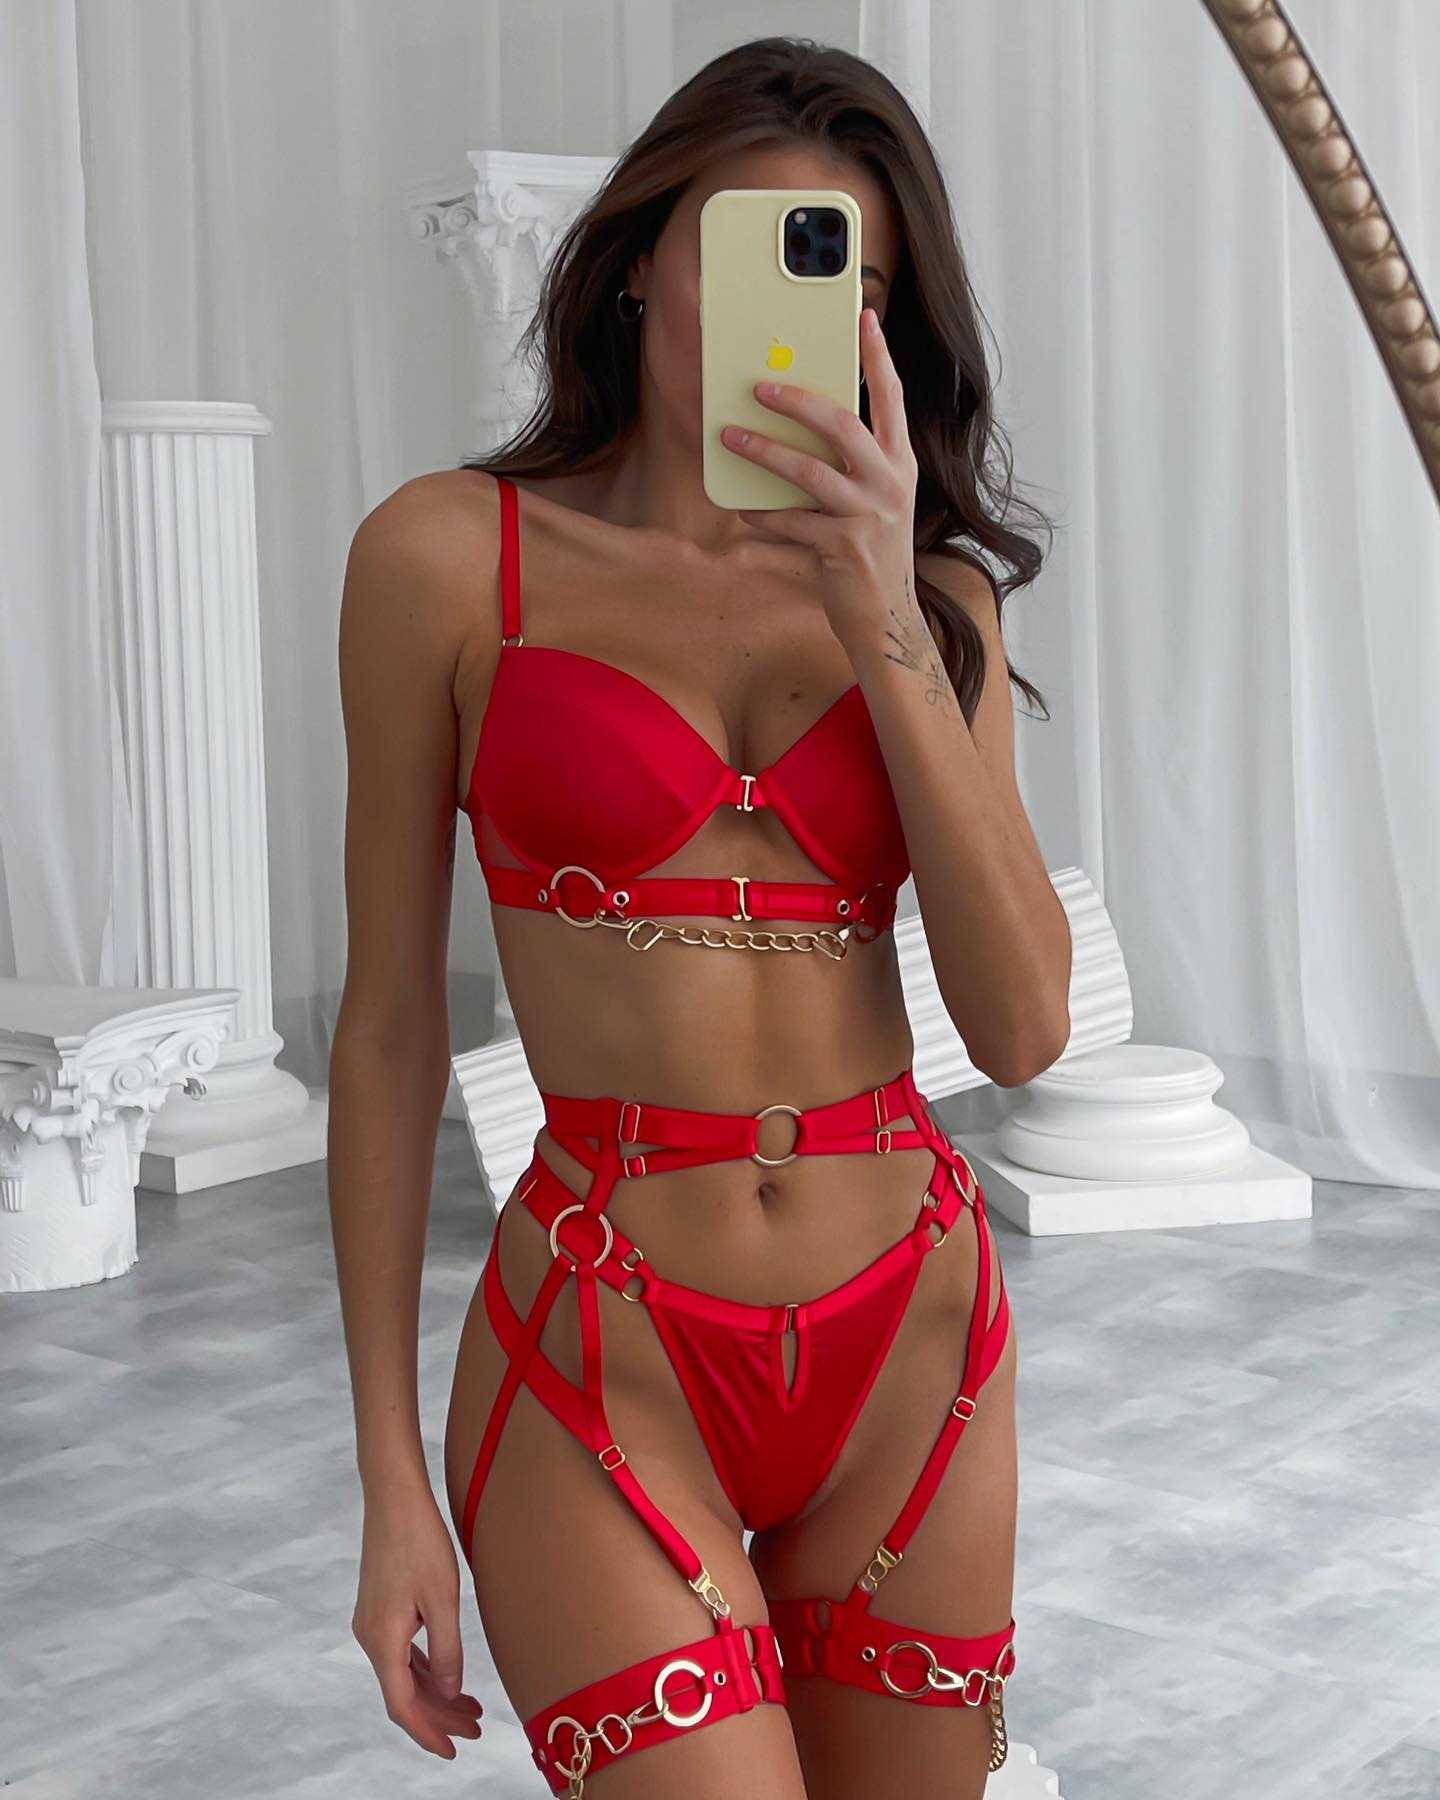 3-Piece Padded Lingerie Set Women Gothic Sensual Chain Decorated Gothic Erotic Set Sexy Red Brief Set